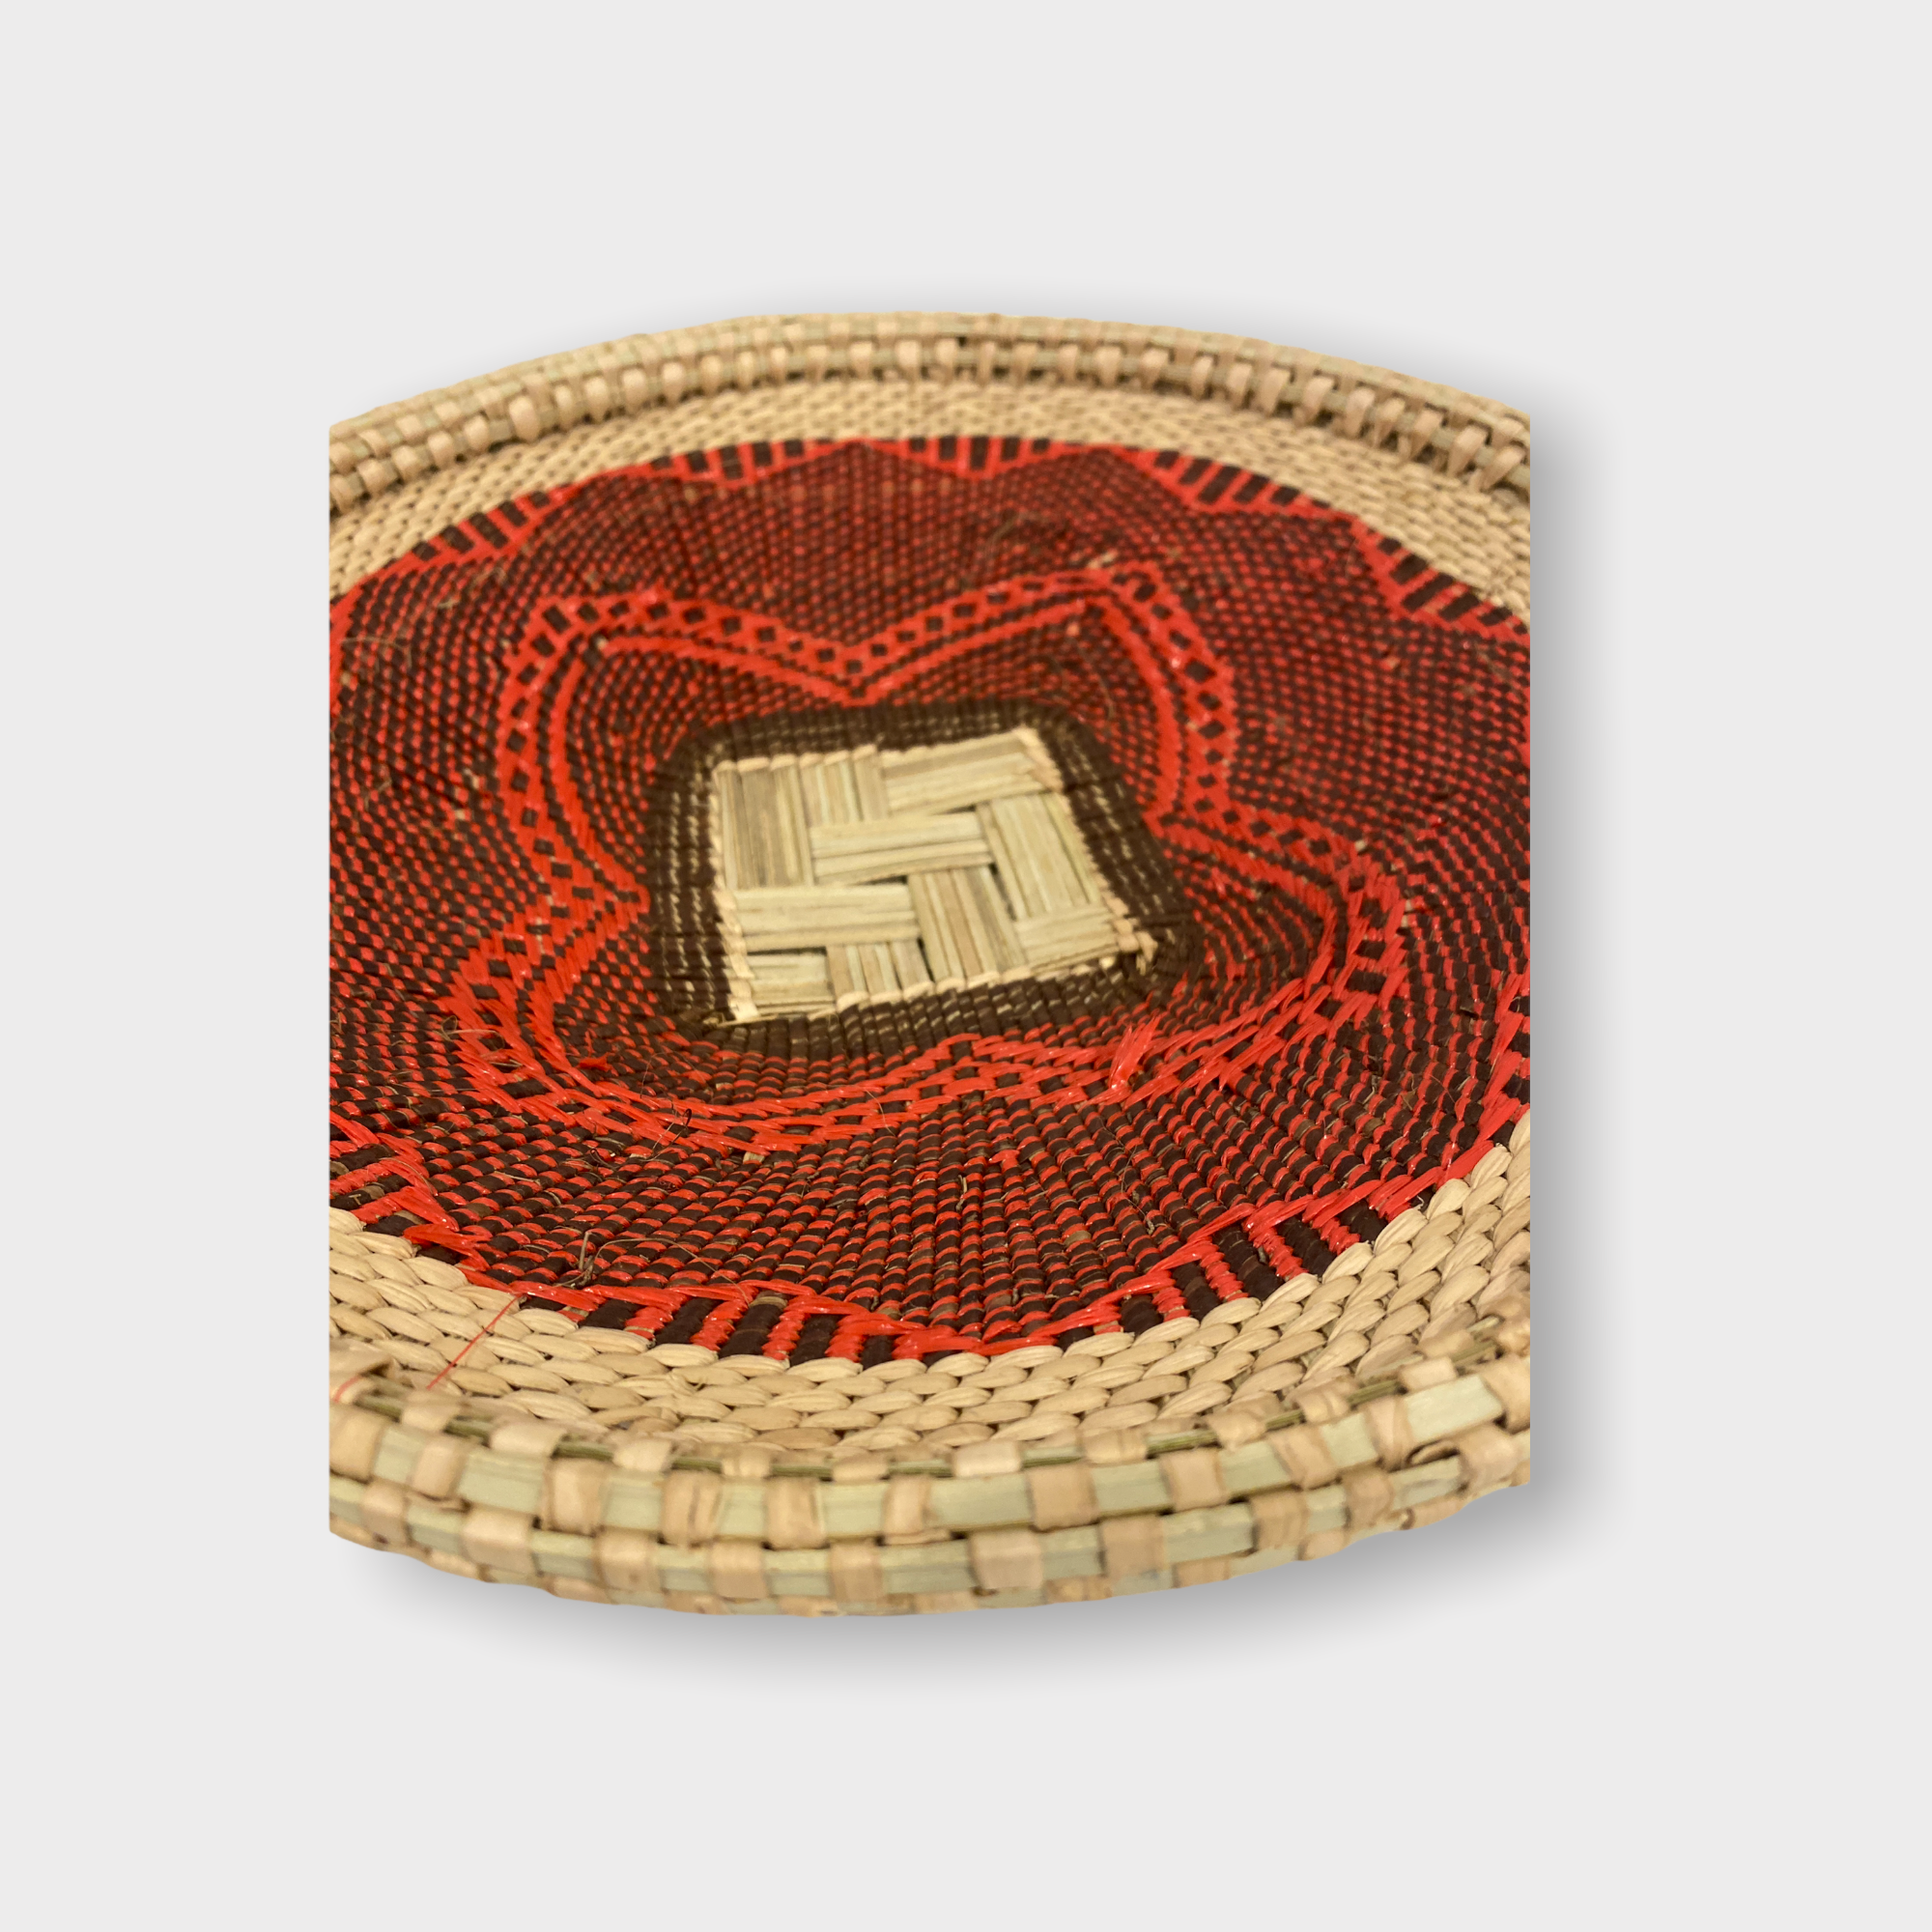 Tonga Baskets - Colour Red (S30.37)